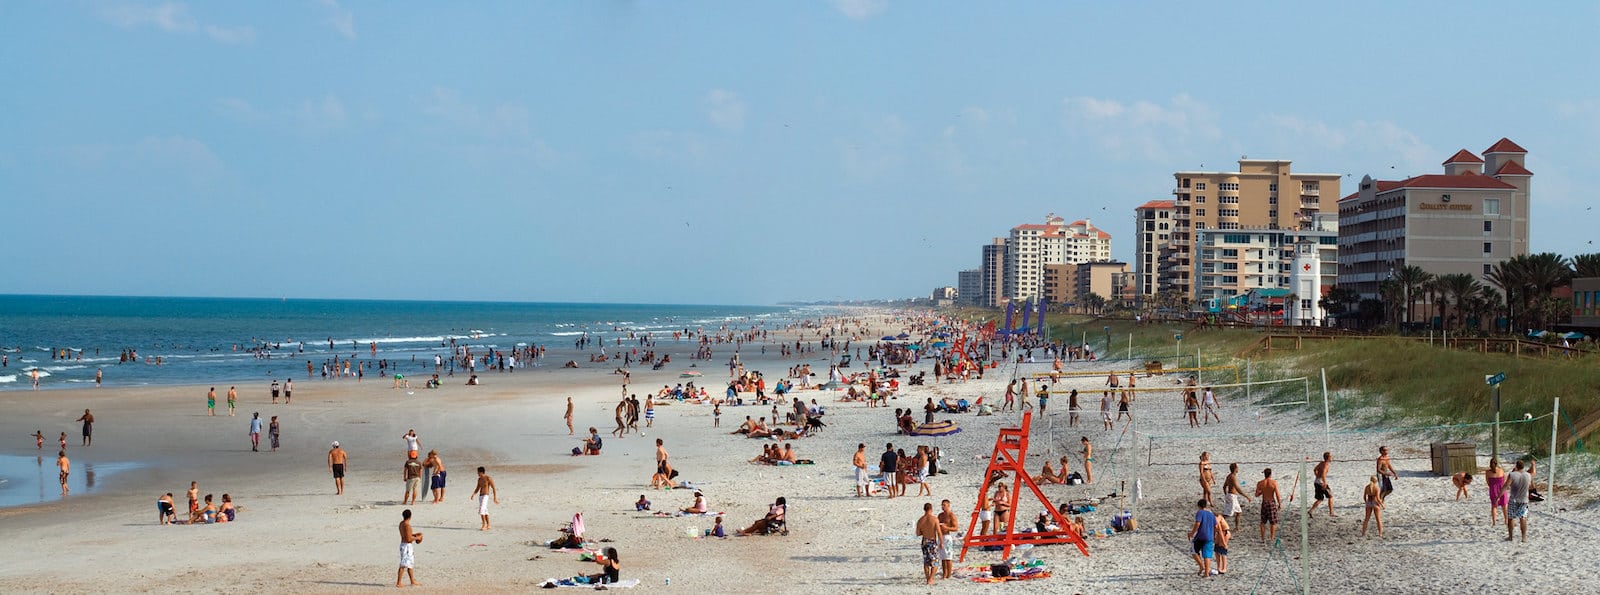 Image of crowds at Jacksonville Beach, Florida